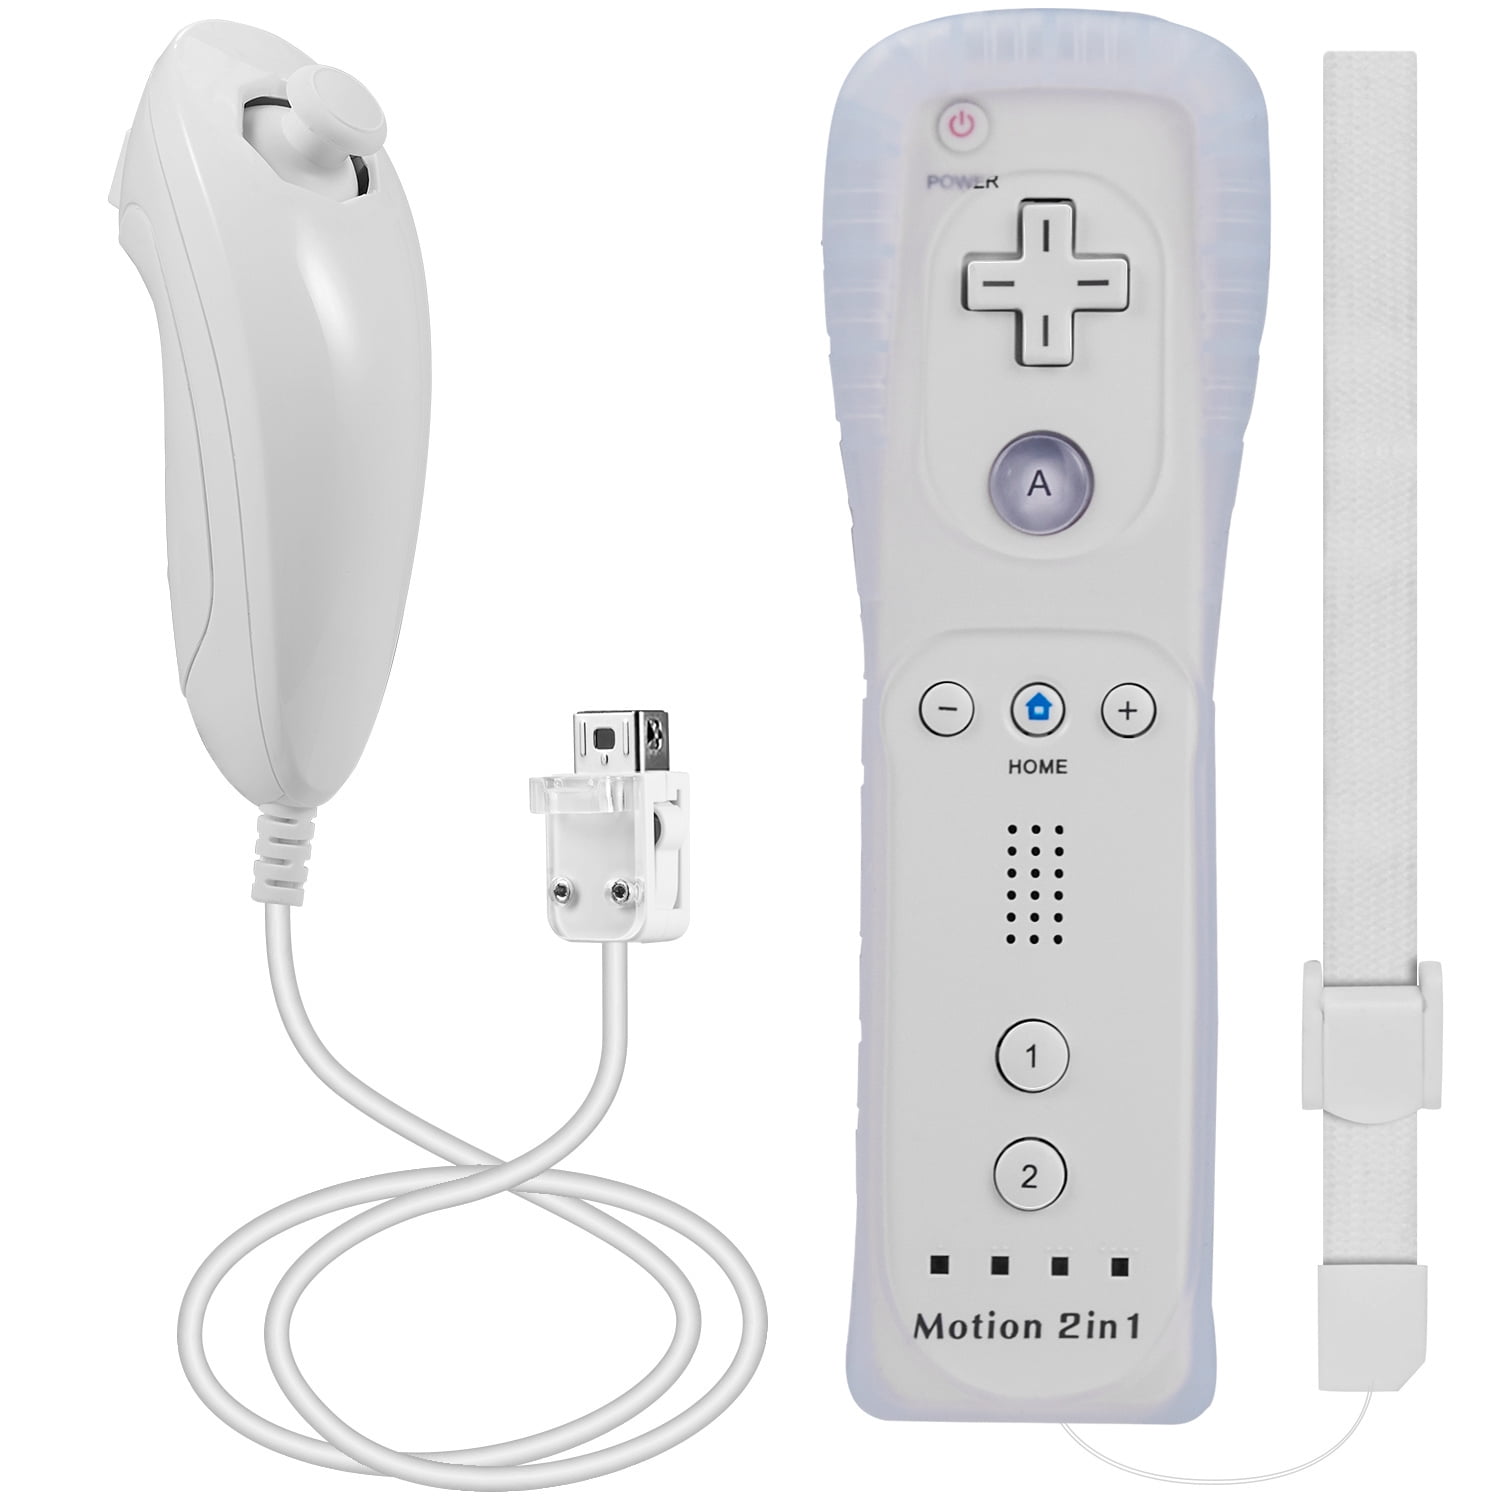 2 Sets Wii Remote Controller with Build-in Motion Sensor Plus and 2 Nunchuck 